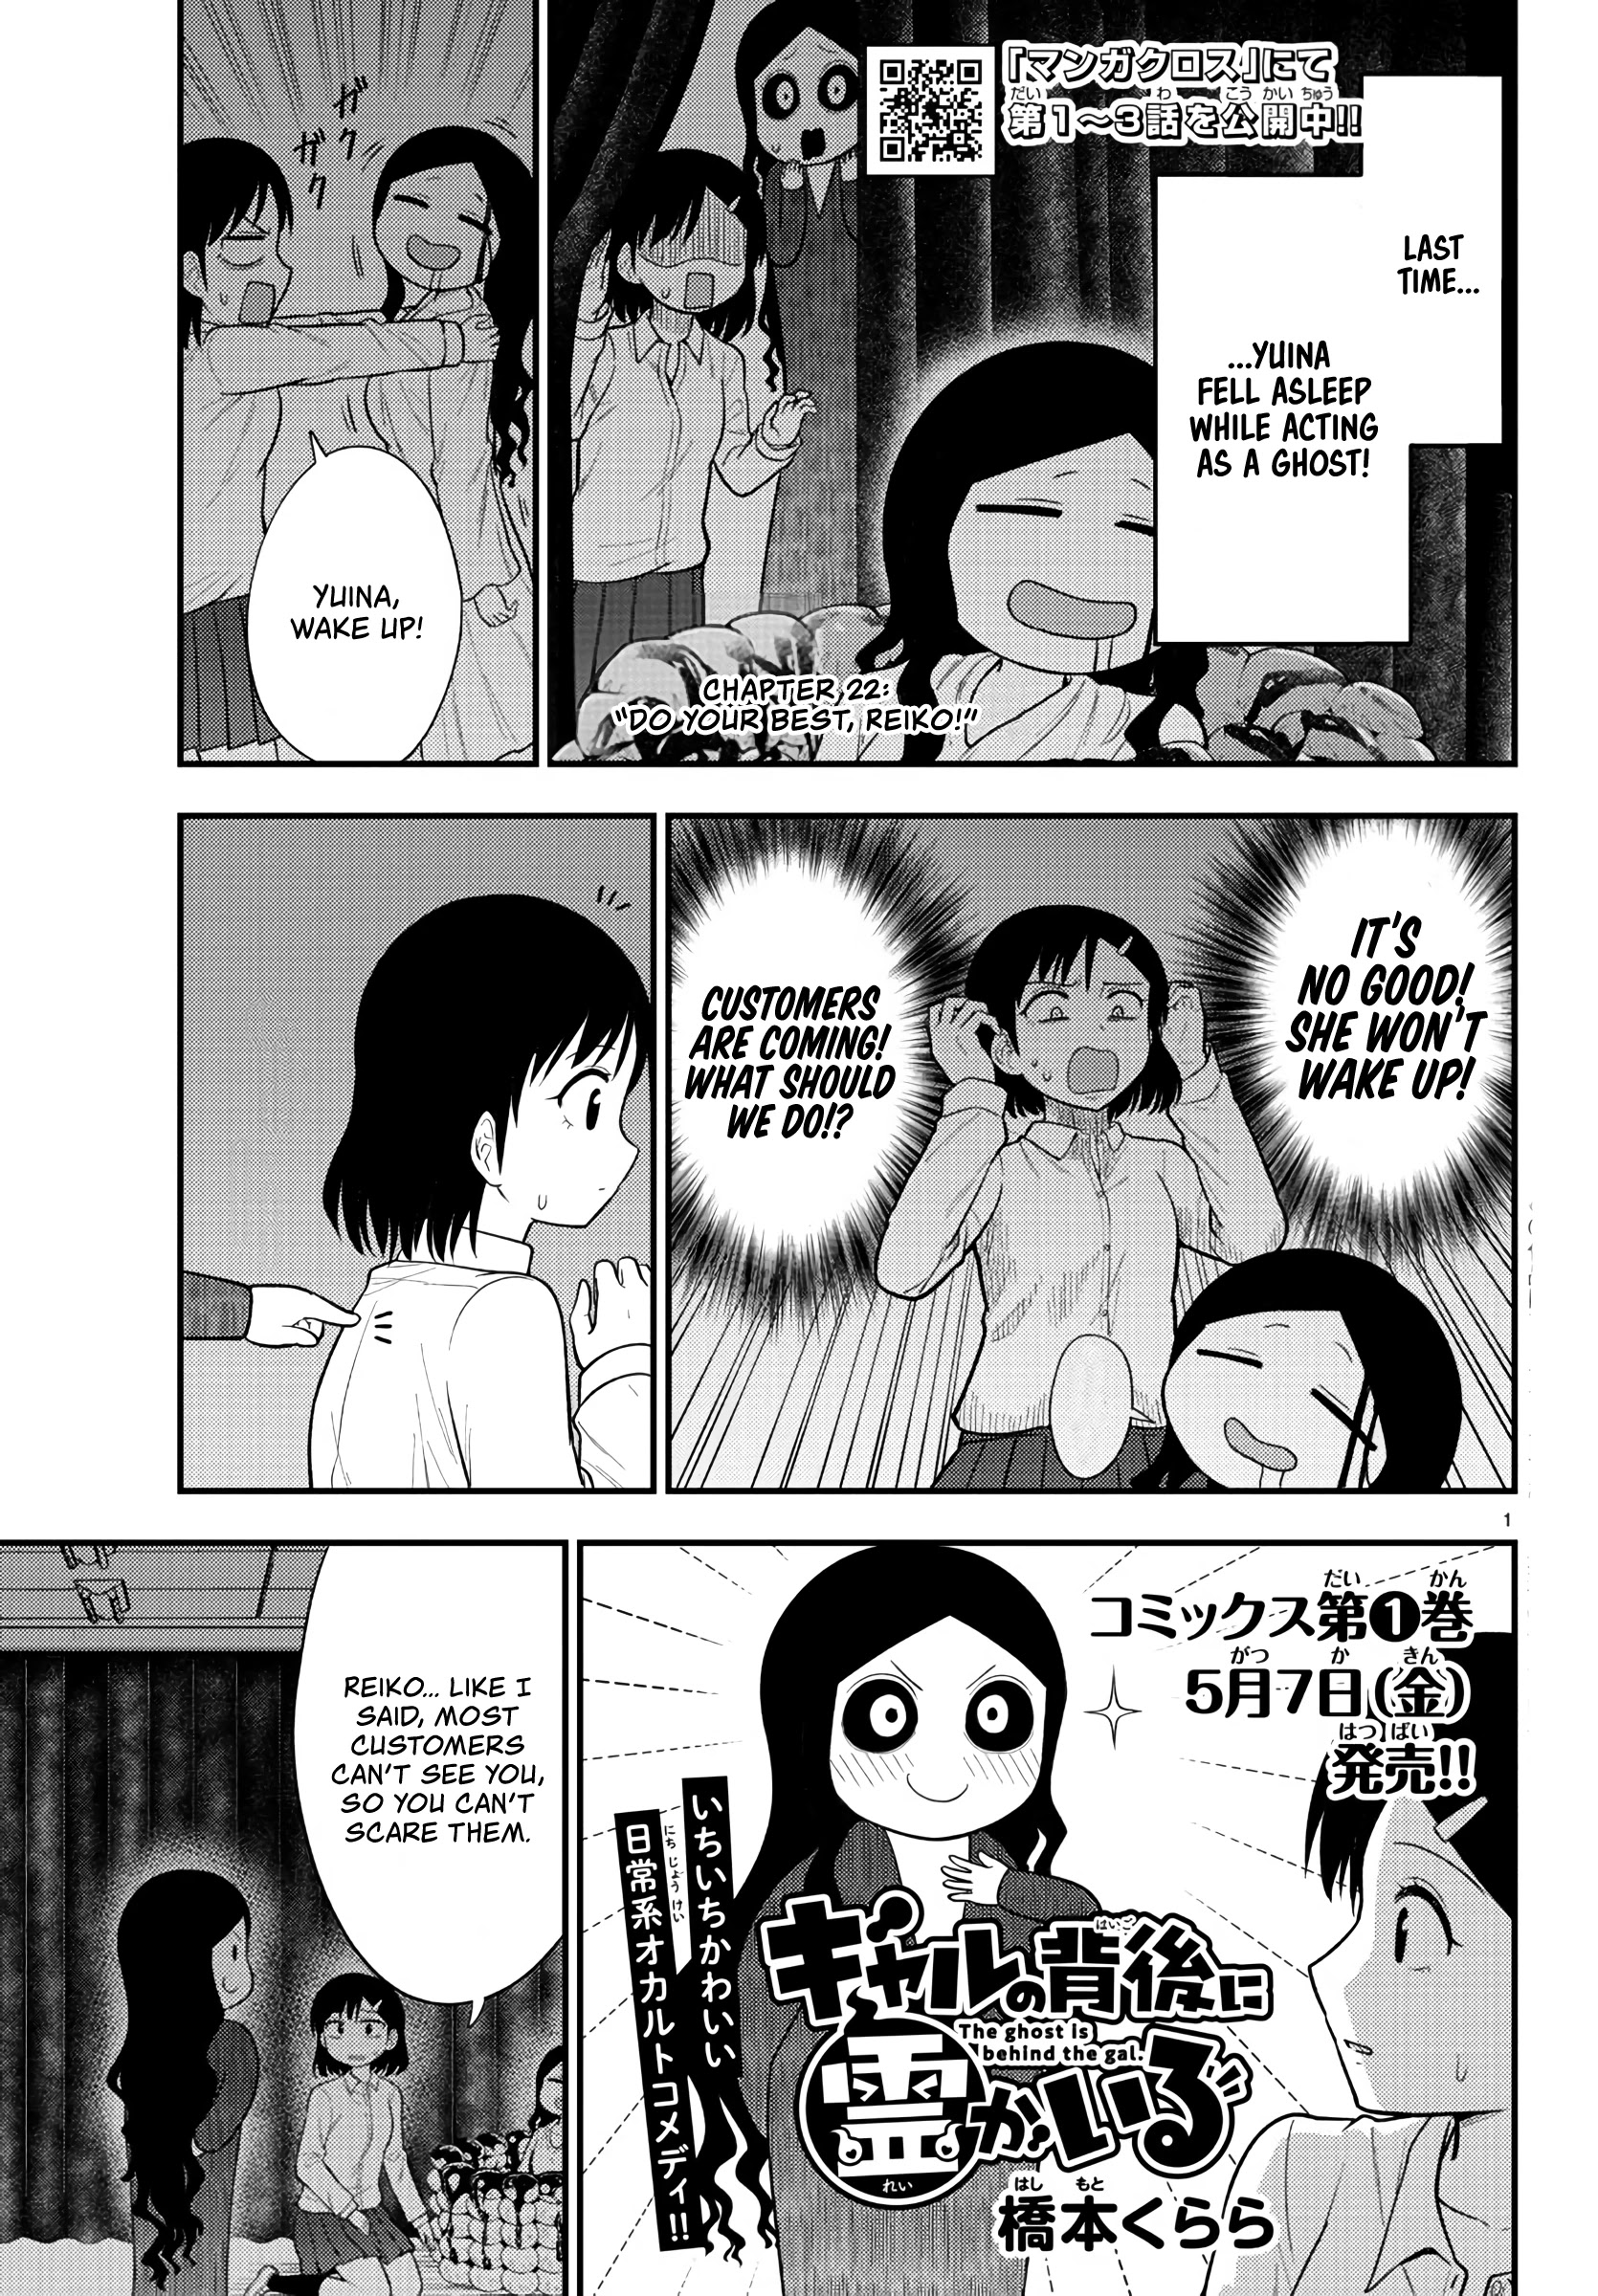 There's A Ghost Behind That Gyaru - chapter 22 - #1